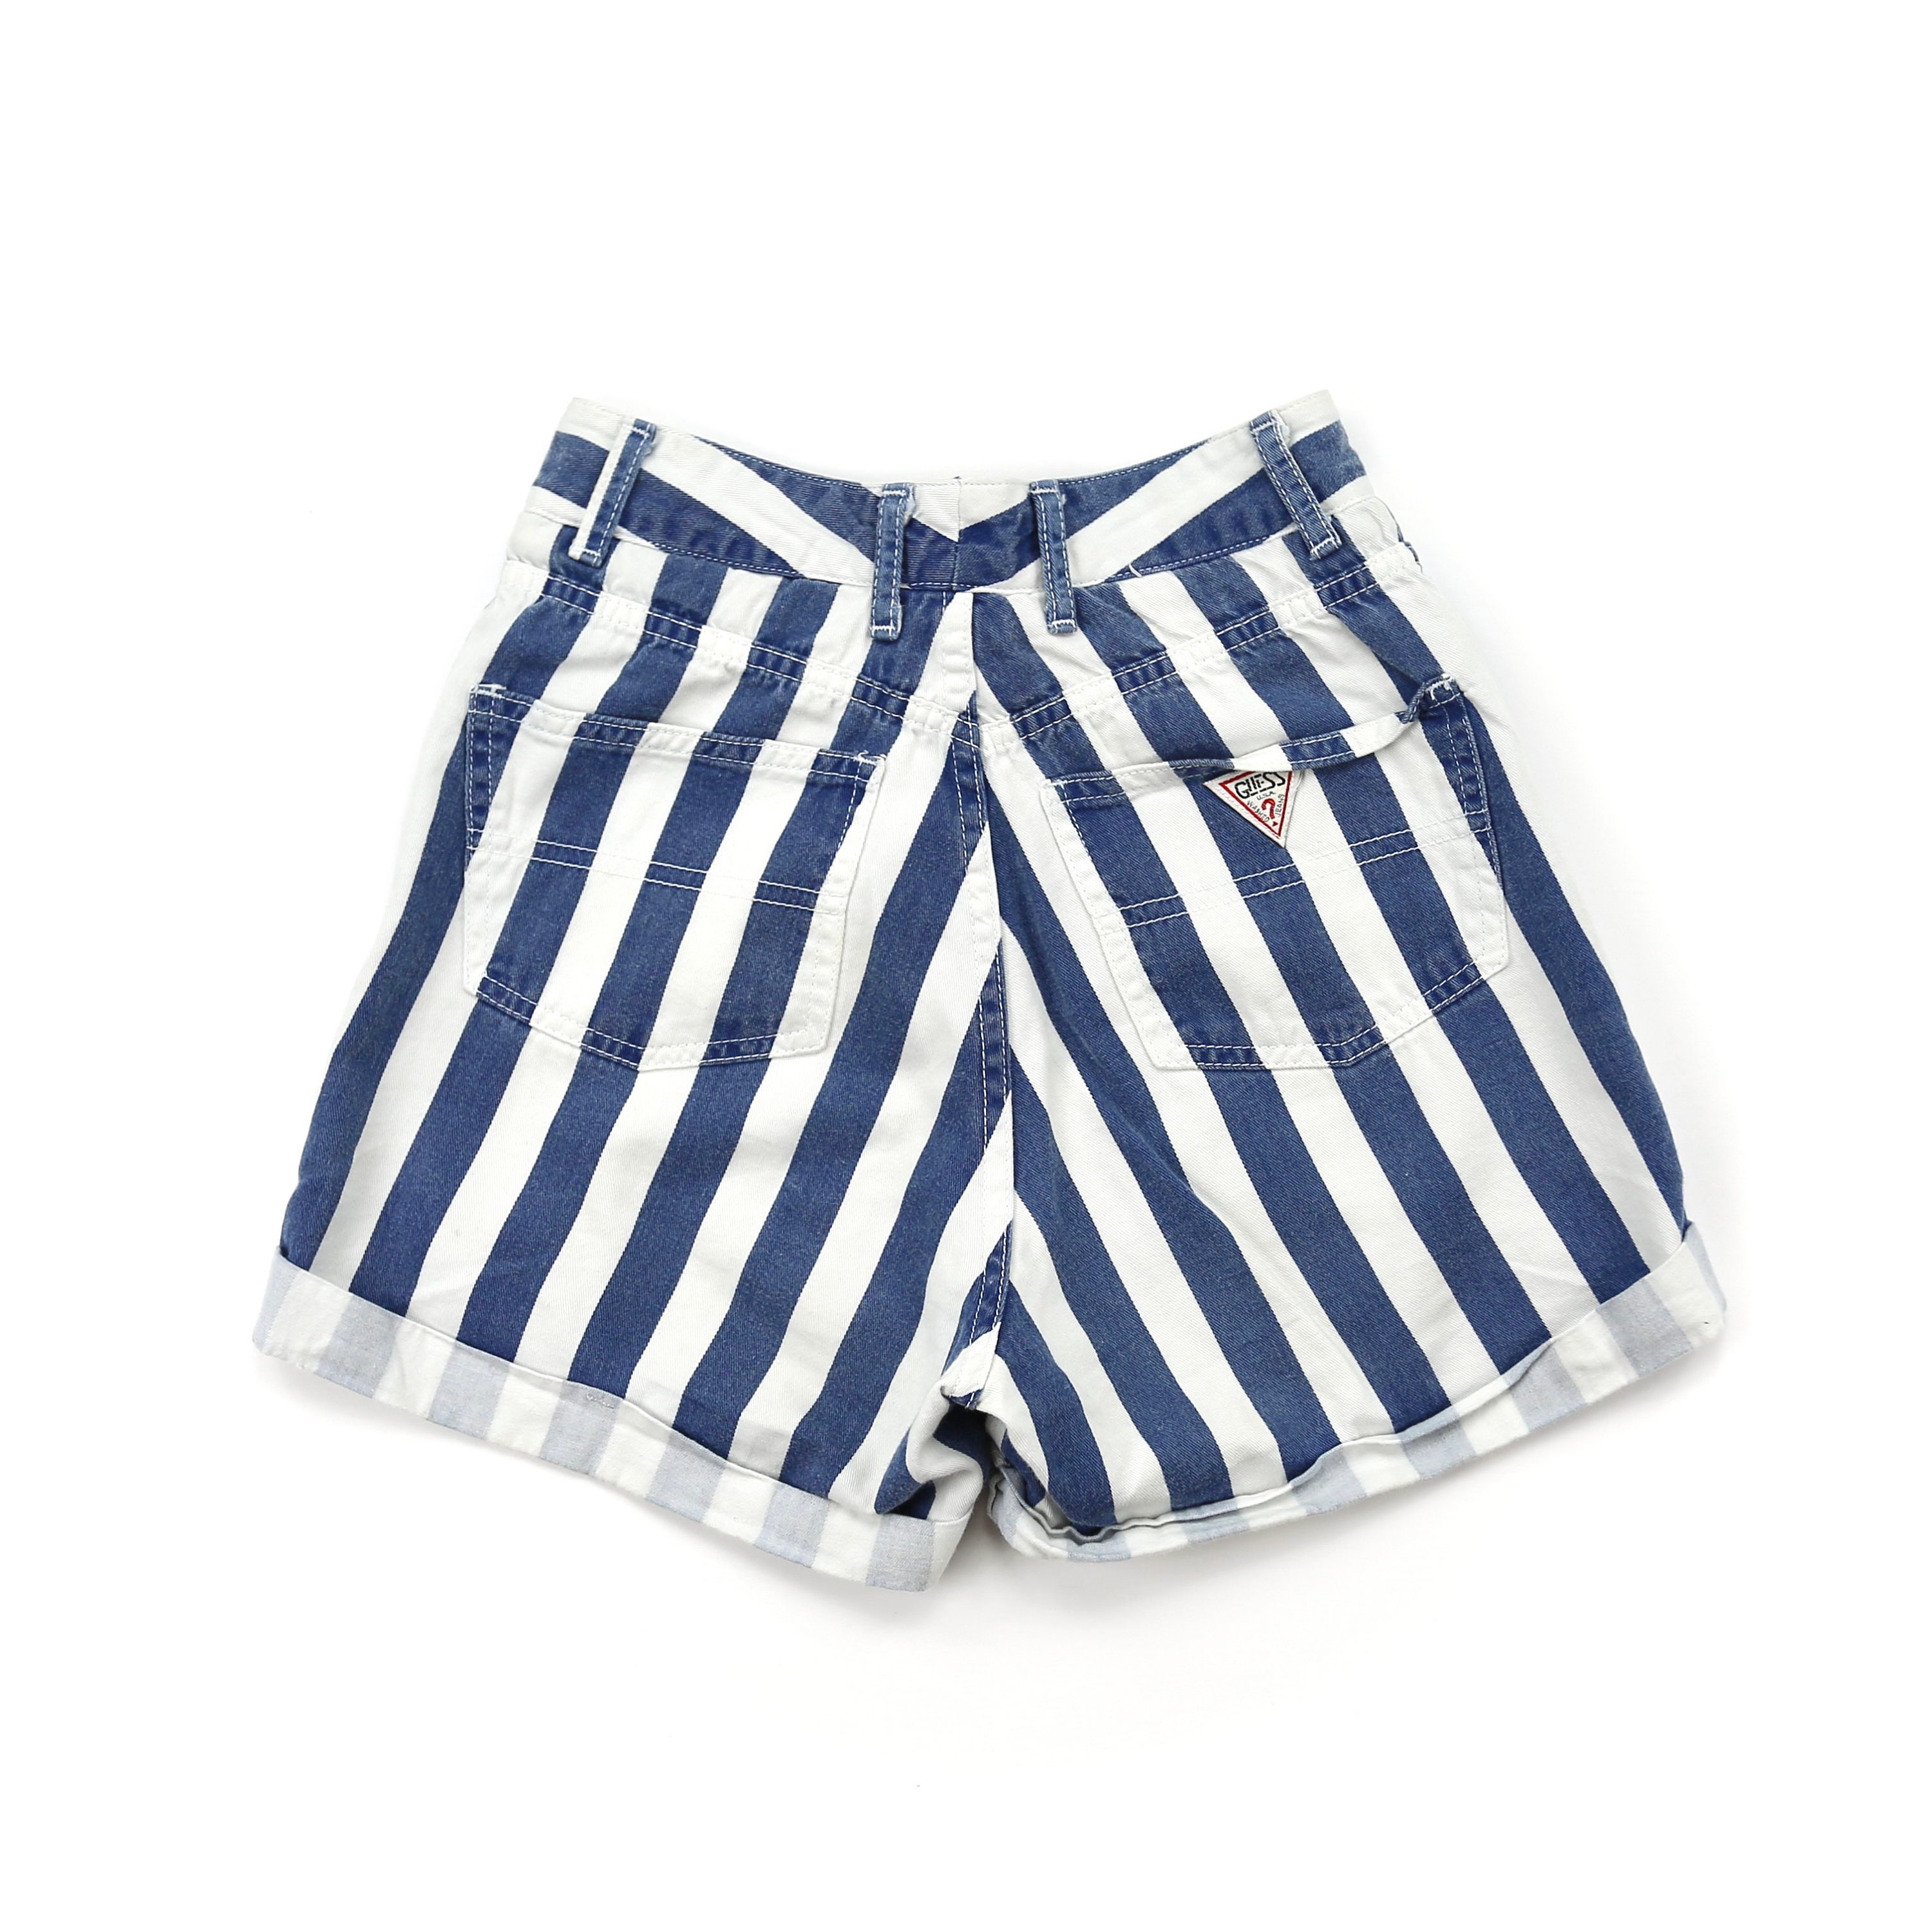 Vintage Guess White and Blue Striped High Waisted Shorts Waist 23/24 - Etsy